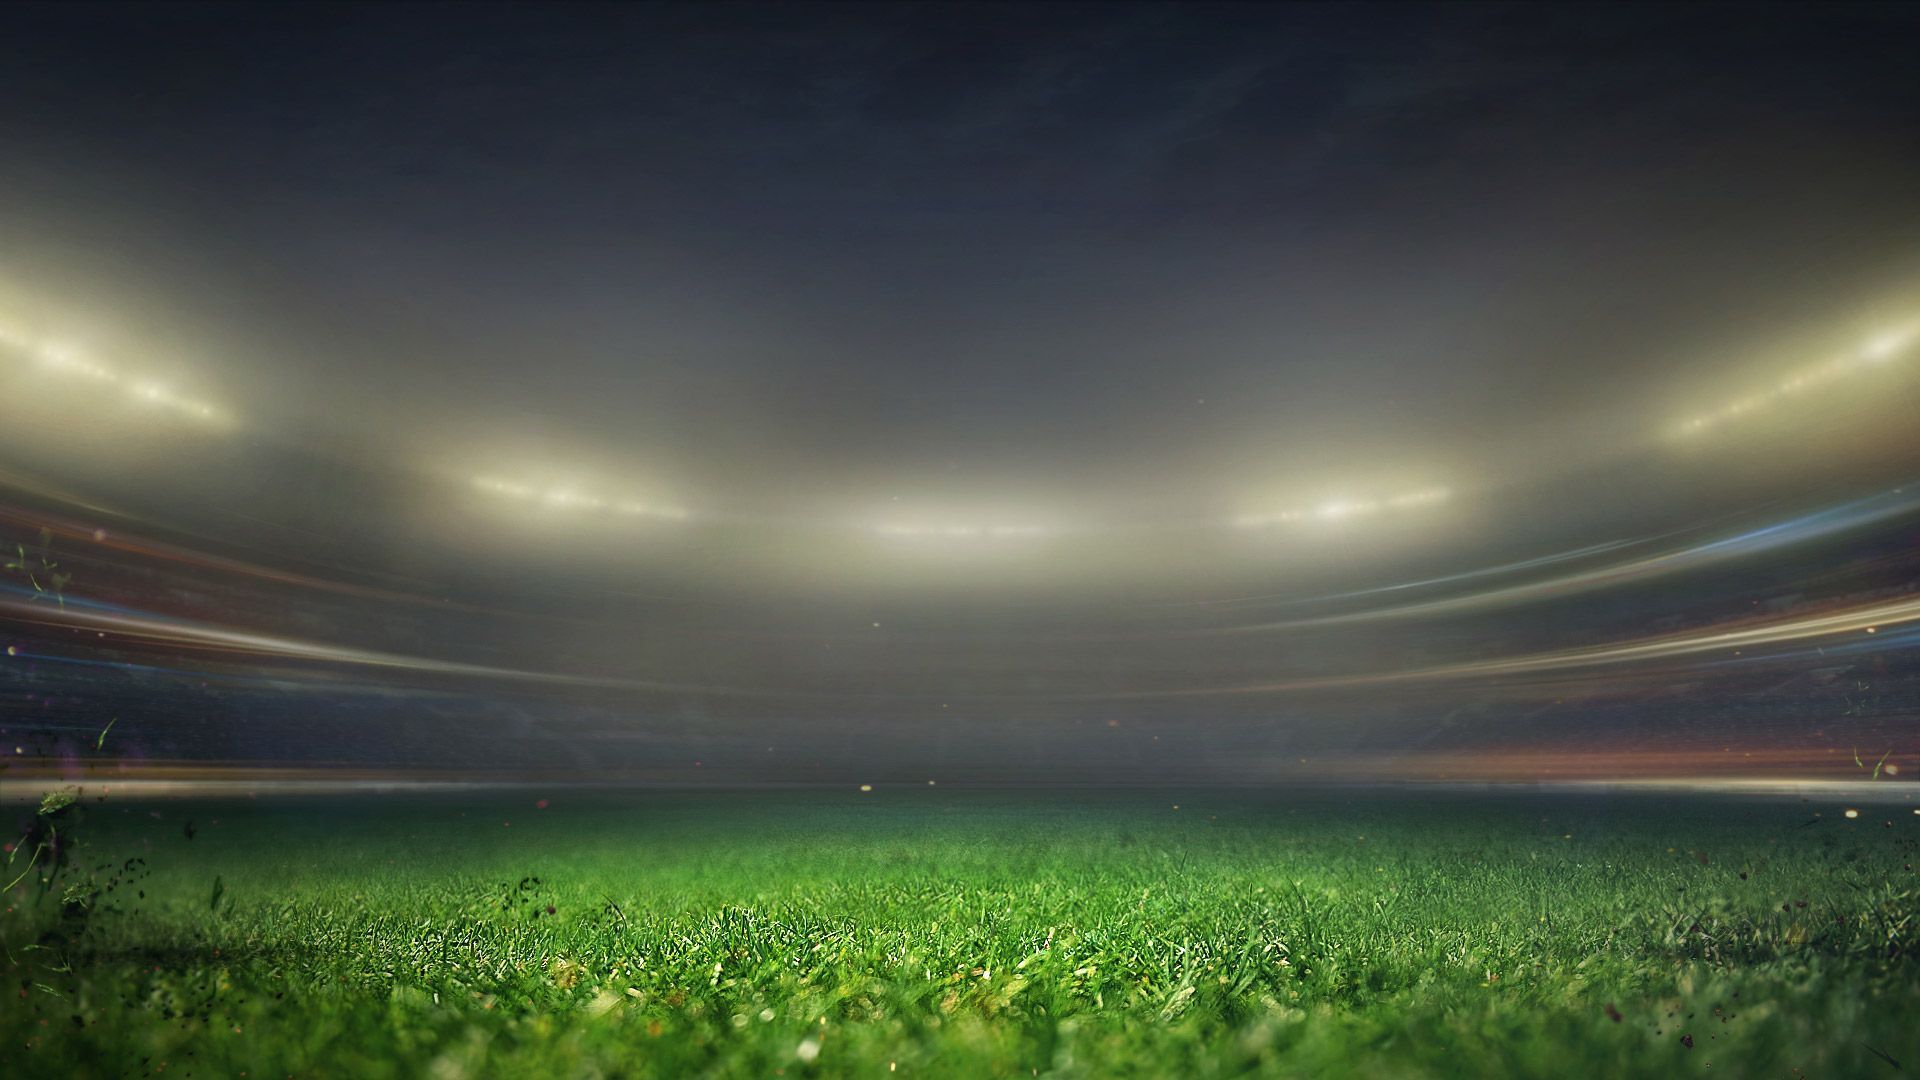 Fifa-15-Home-Page-Ground-Wallpapers-HD.jpg